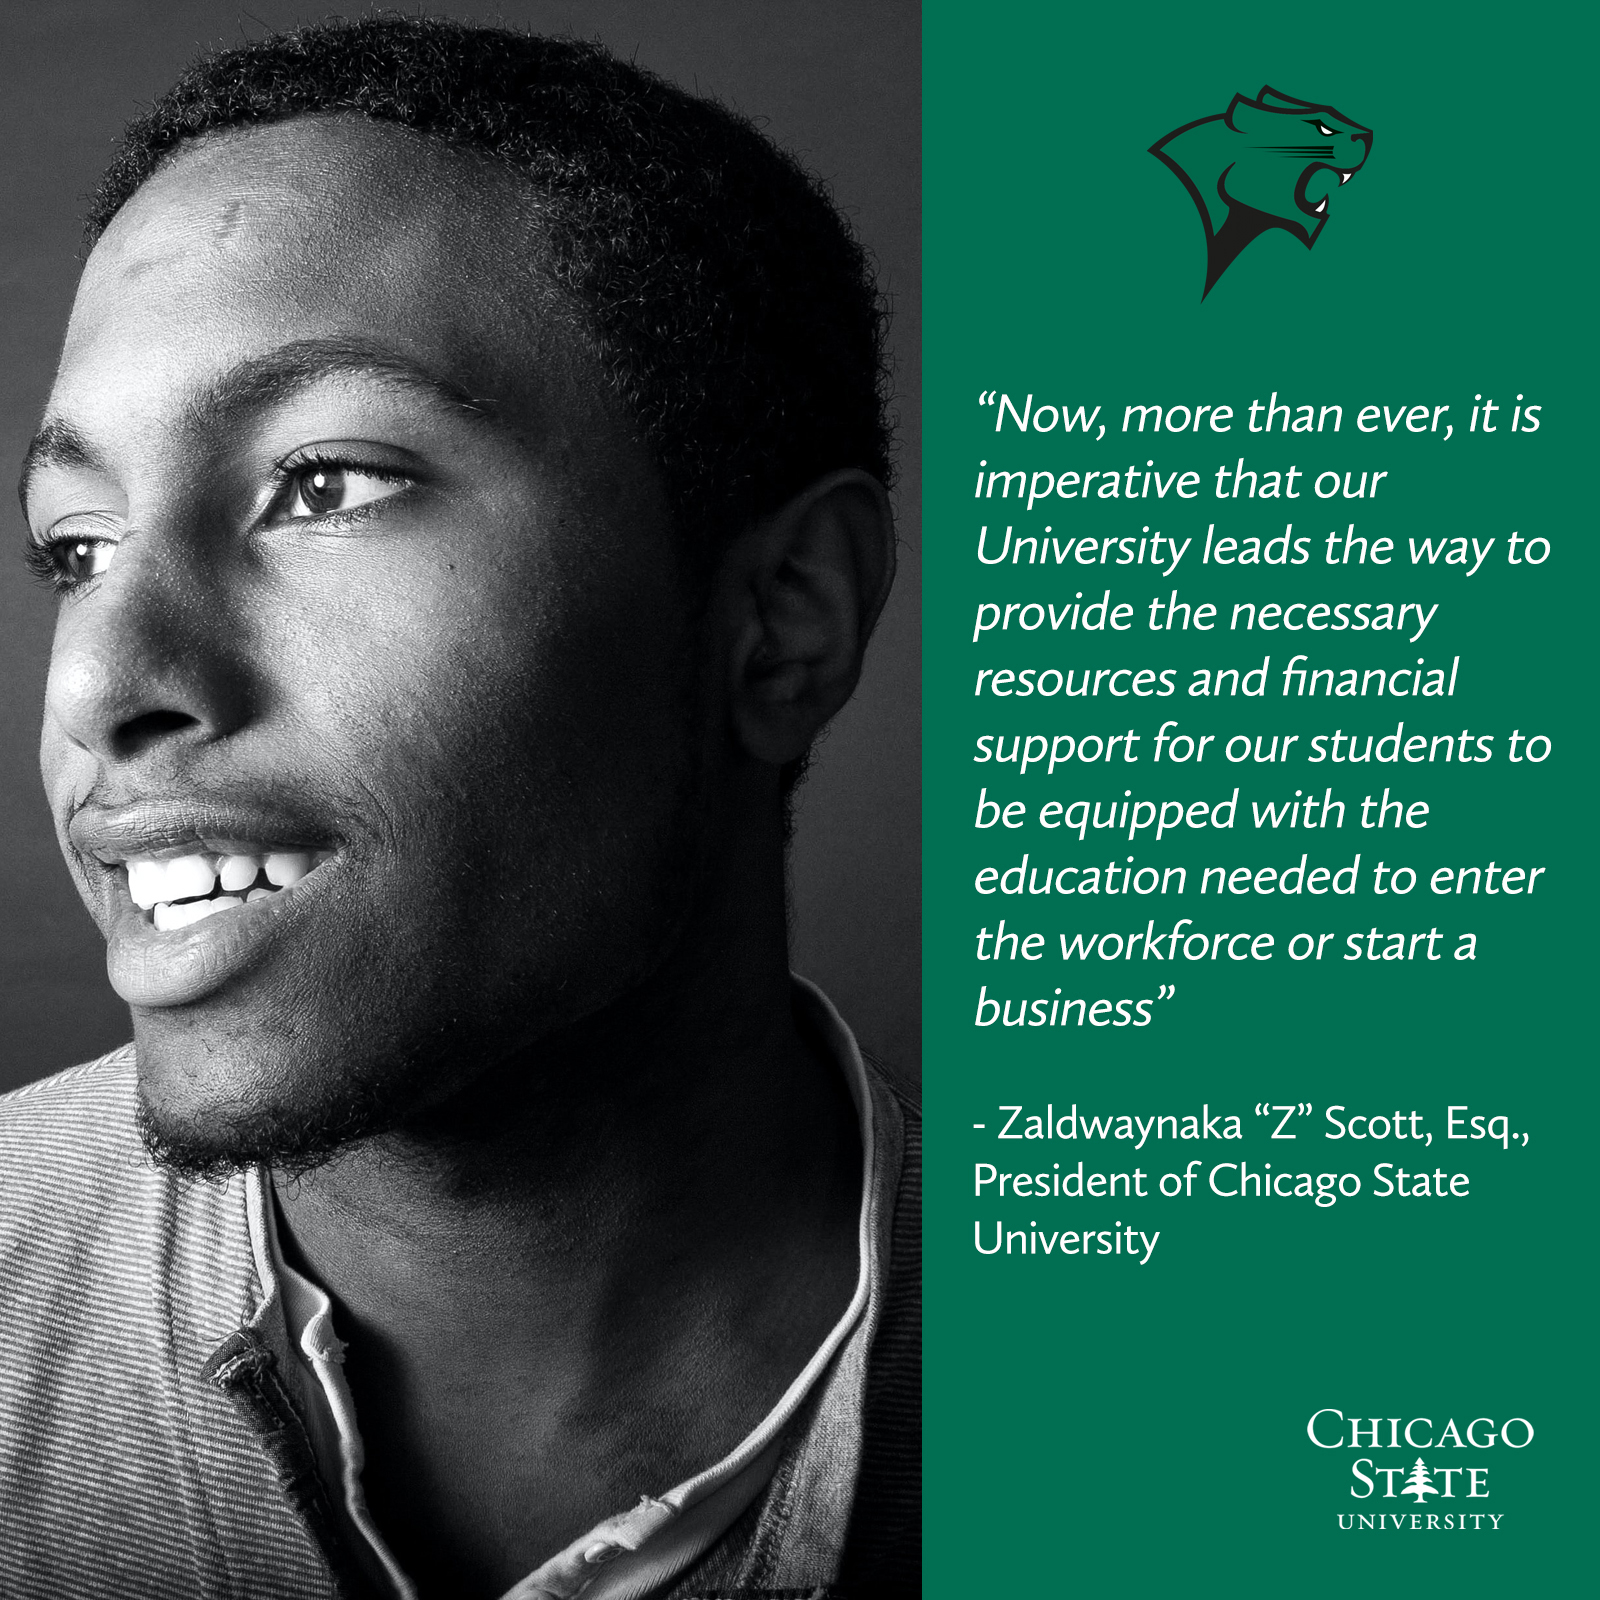 CSU Announces Cougar Commitment Initiative to Close the Education and Wealth Gap